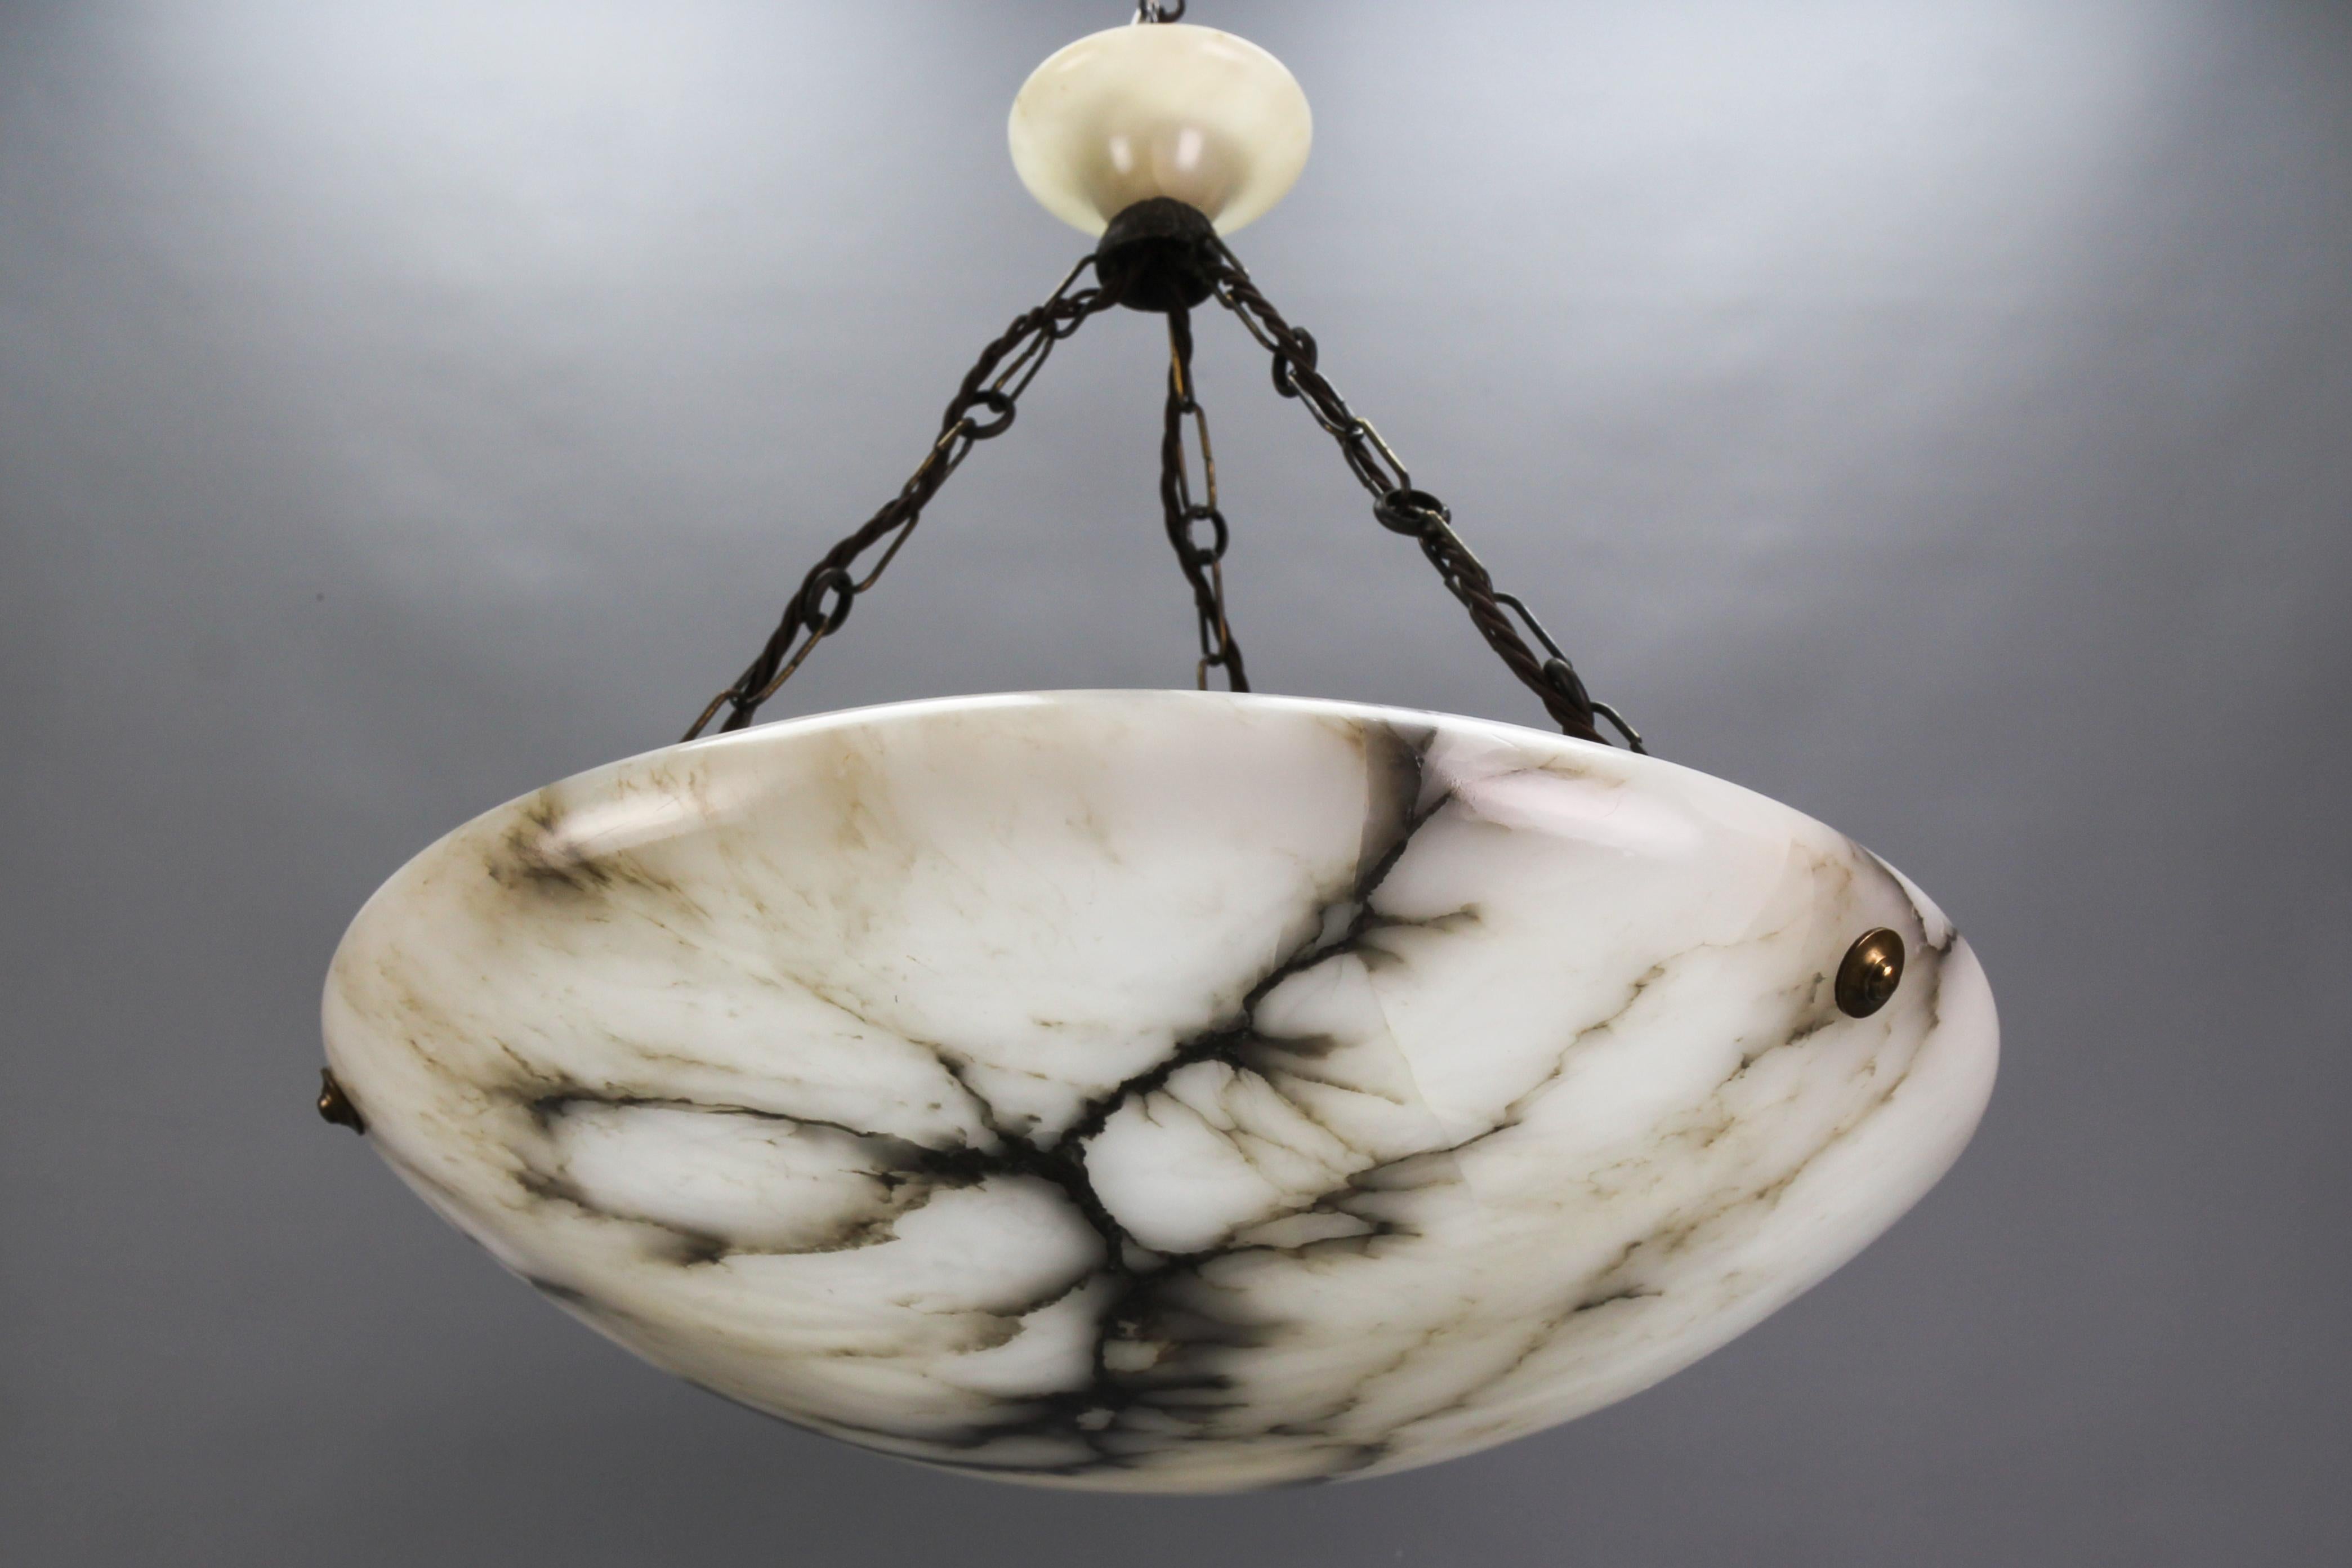 Large black veined white and grey alabaster and brass pendant light fixture, France, circa the 1920s.
An impressive and wonderful alabaster pendant ceiling light fixture from circa the 1920s. Beautifully veined and masterfully carved white and light